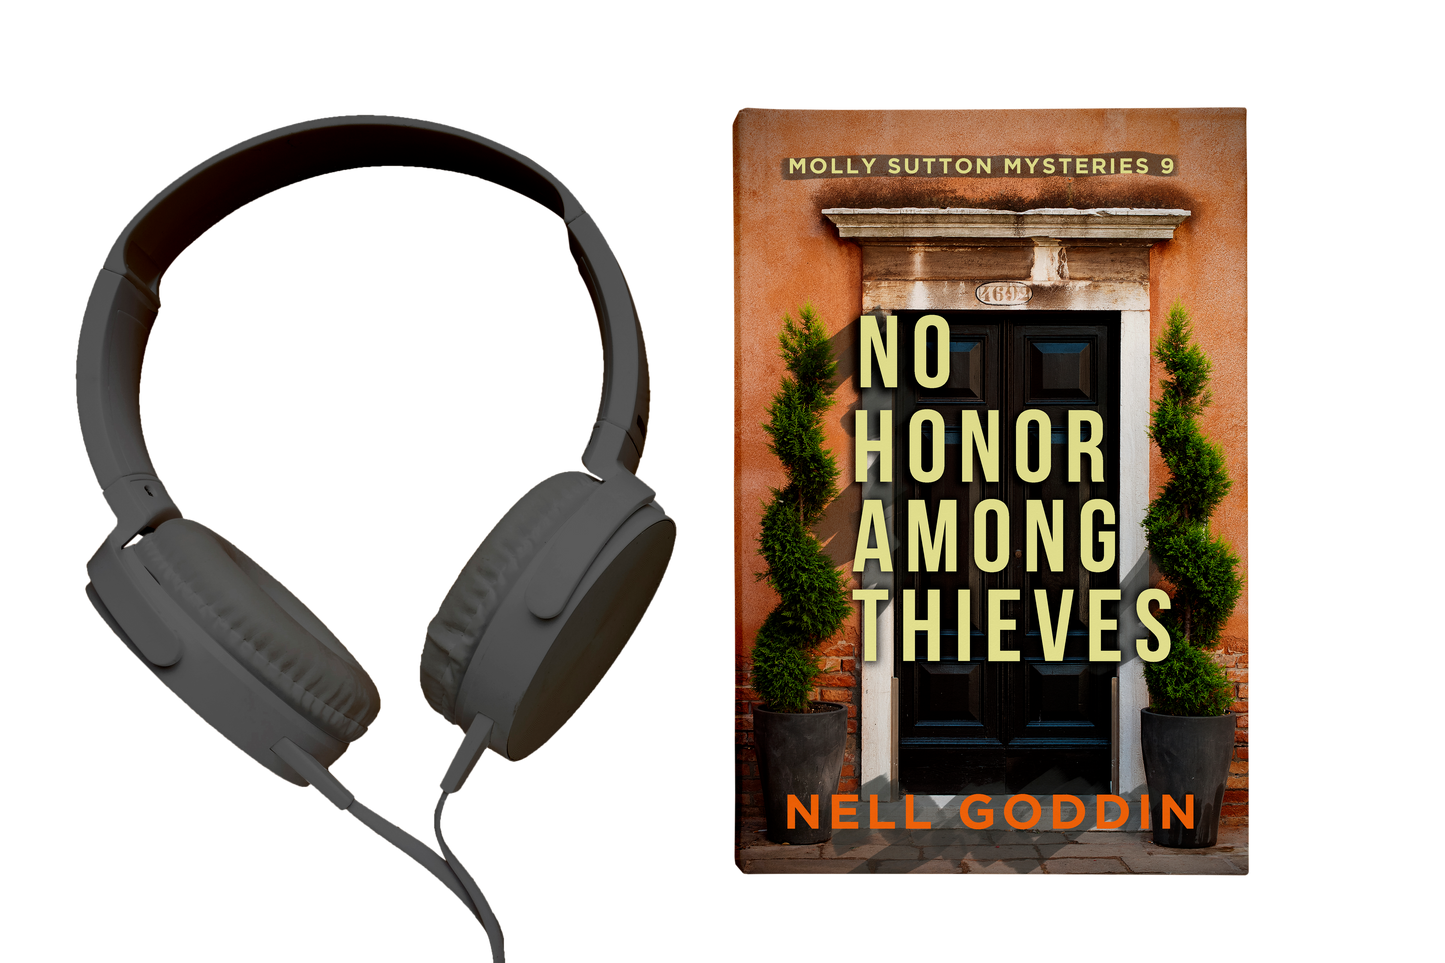 No Honor Among Thieves (Molly Sutton Mysteries 9): Audio